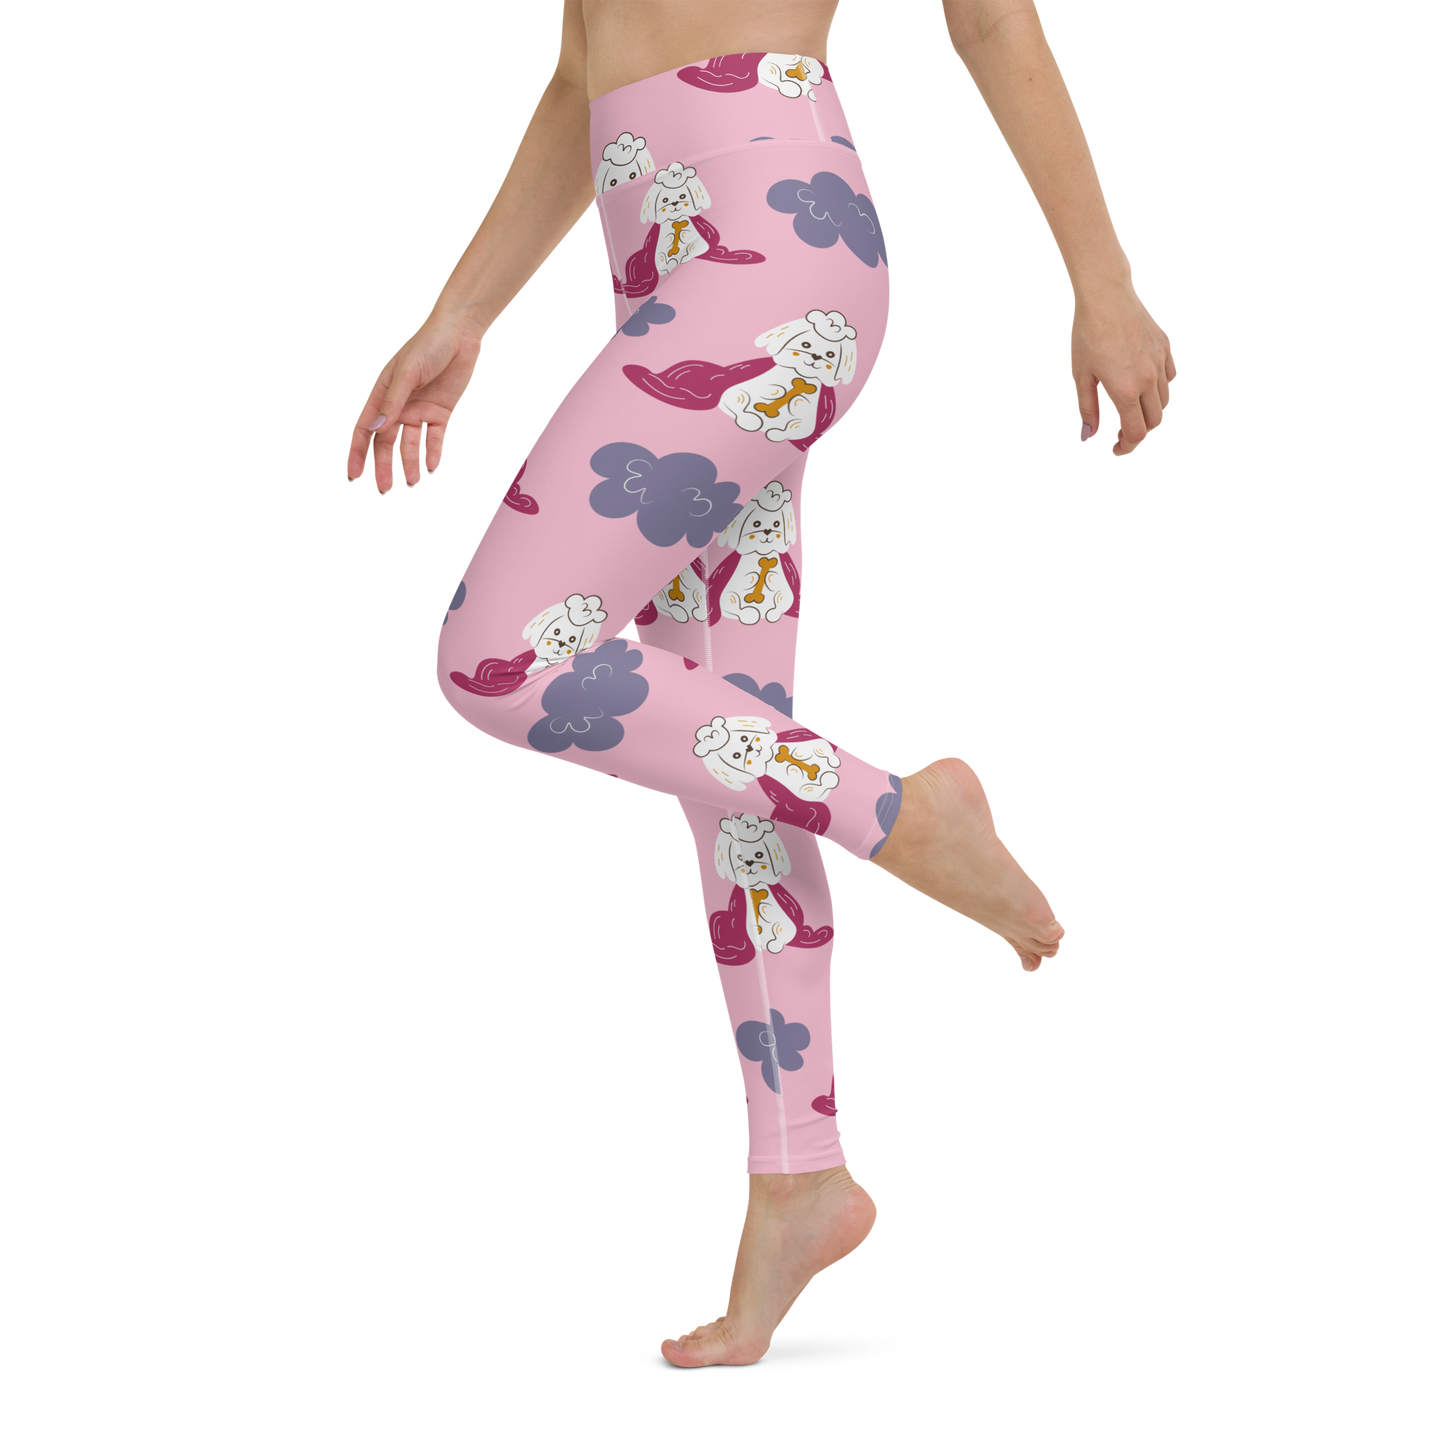 Cozy Dogs | Seamless Patterns | All-Over Print Yoga Leggings - #10